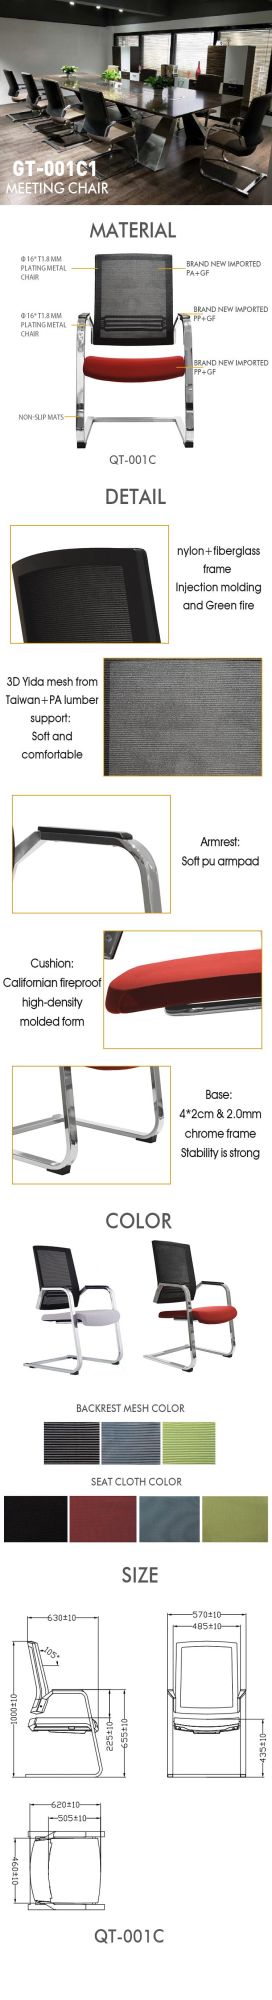 Stand Export Packing Metal Huy 74*59*63 Student Chair Office Chairs